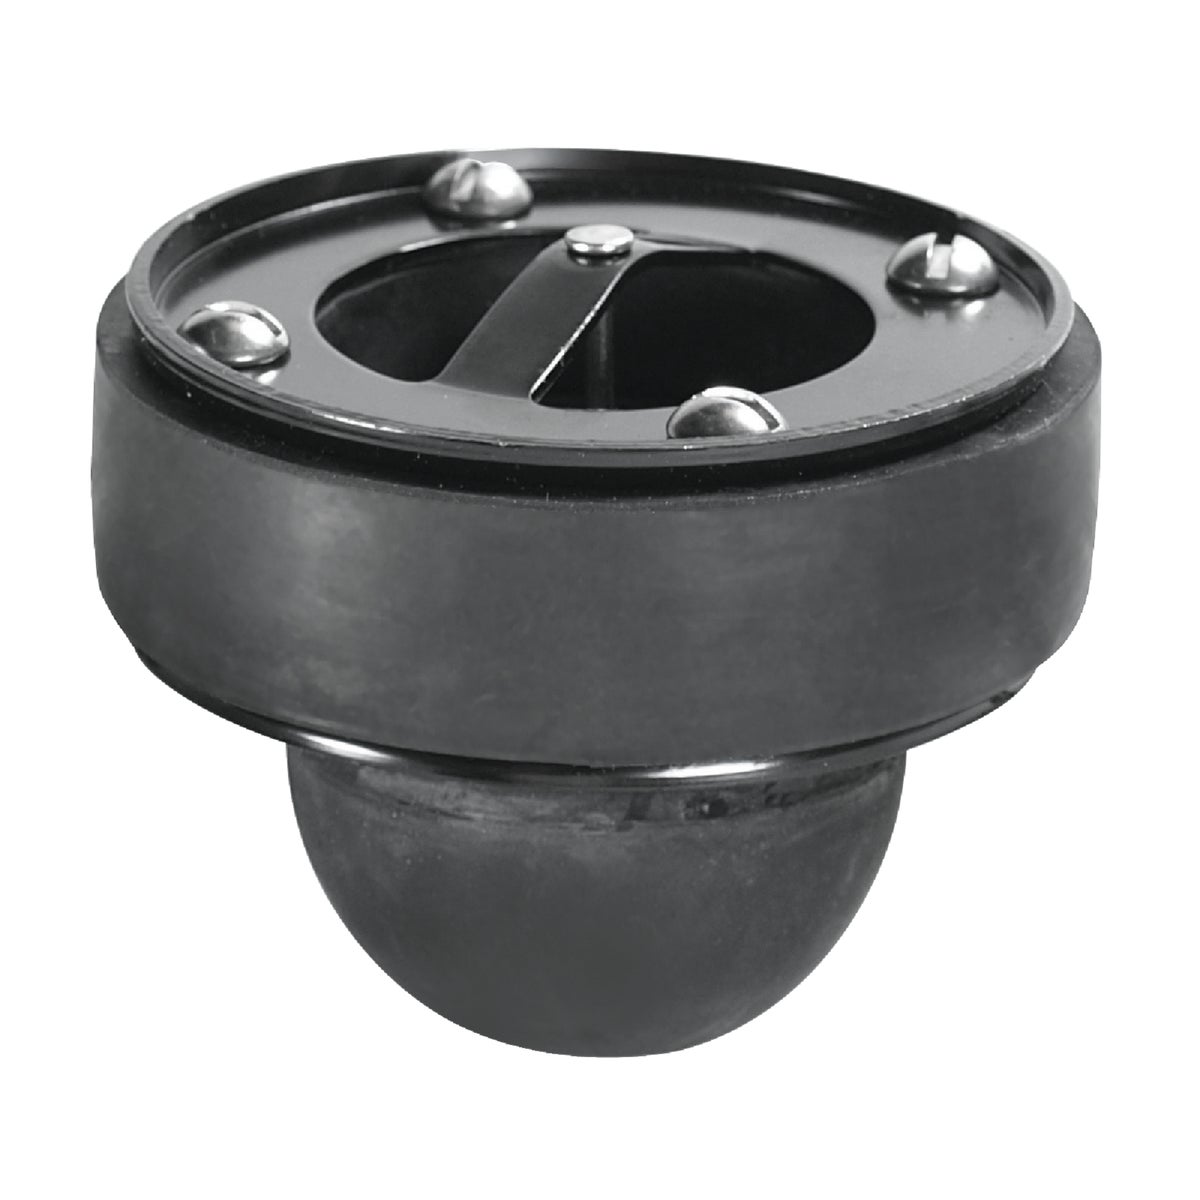 Flood-Guard 4FH Flood-Guard 4 In. Rubber Float Gasket Check Valve 4FH